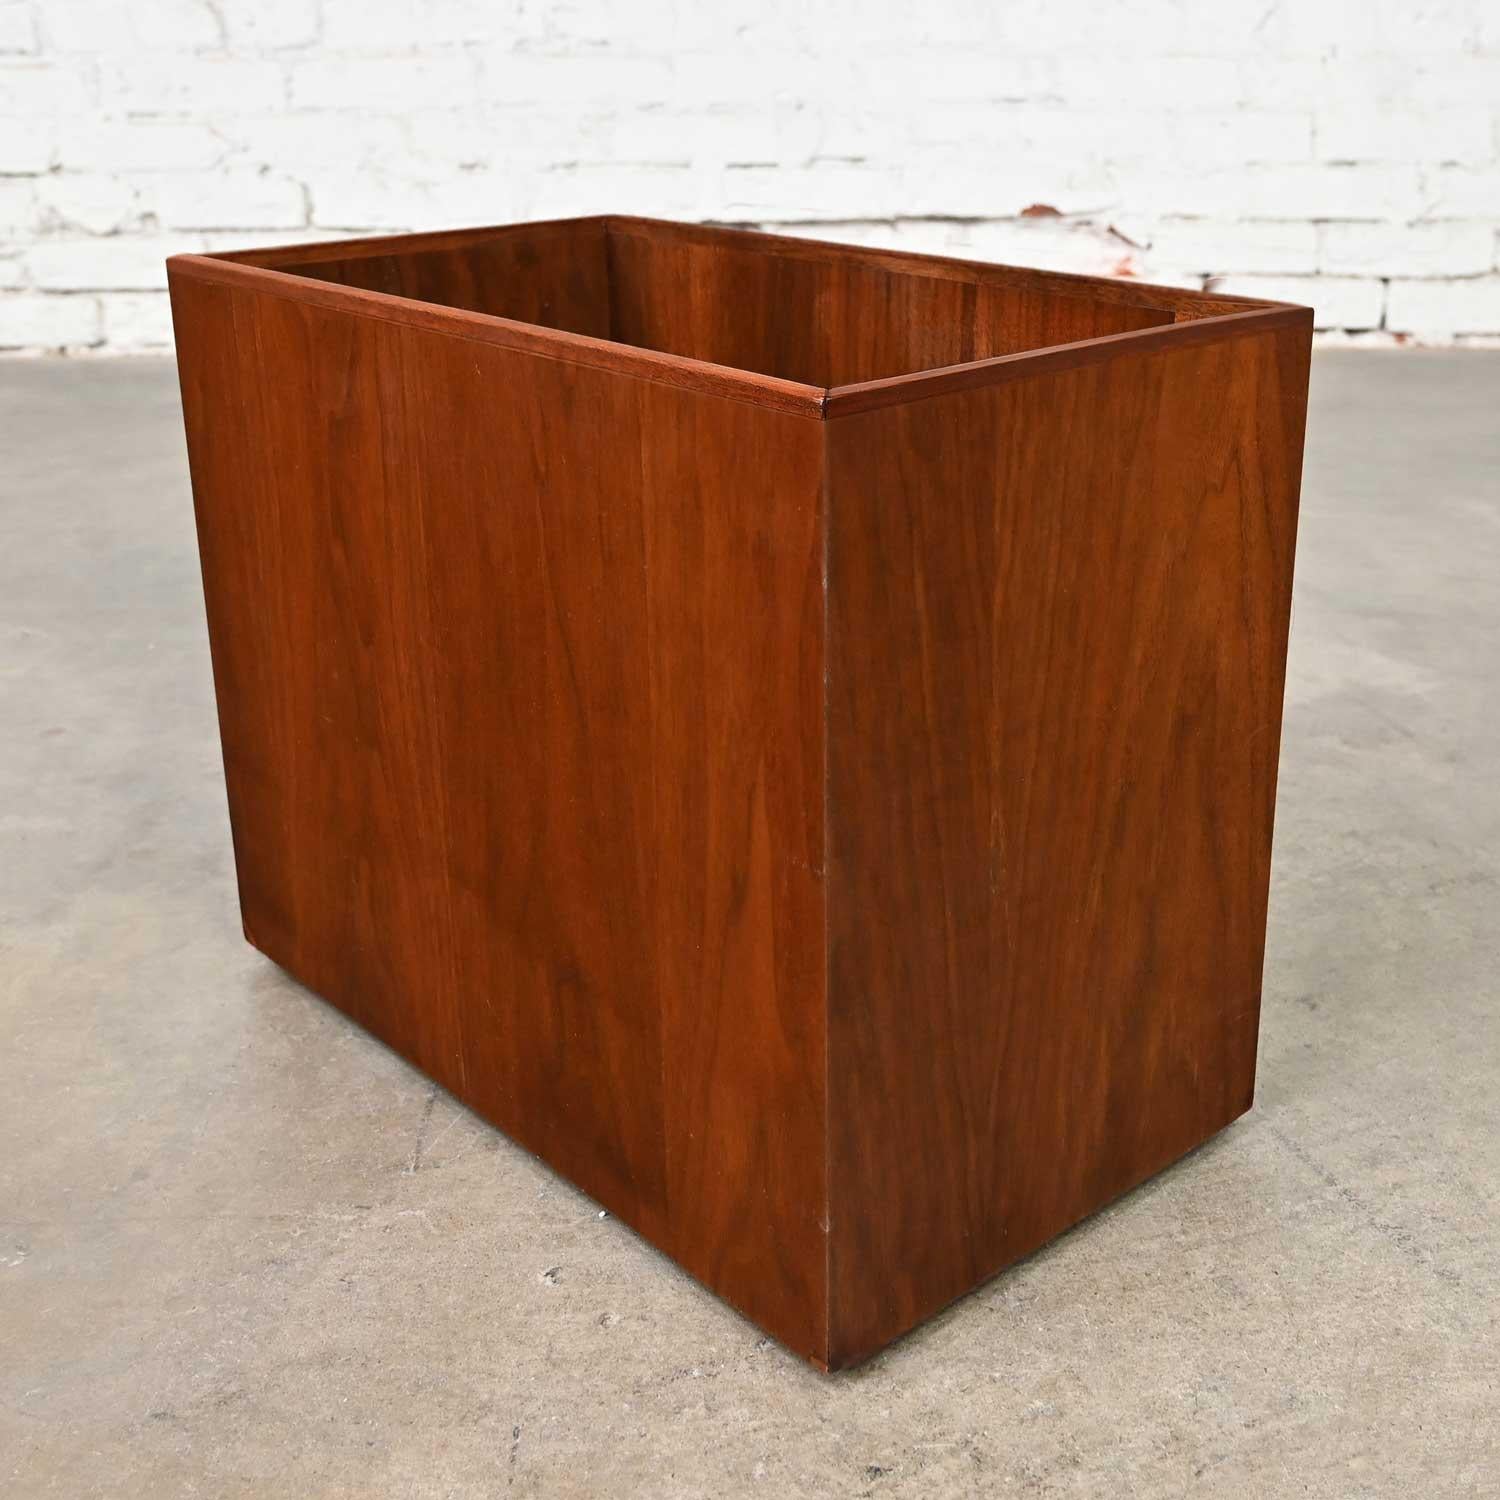 Lovely vintage Mid-Century Modern Scandinavian Modern walnut magazine or file box. Beautiful condition, keeping in mind that this is vintage and not new so will have signs of use and wear. No outstanding flaws. It has been Danish oiled. Please see